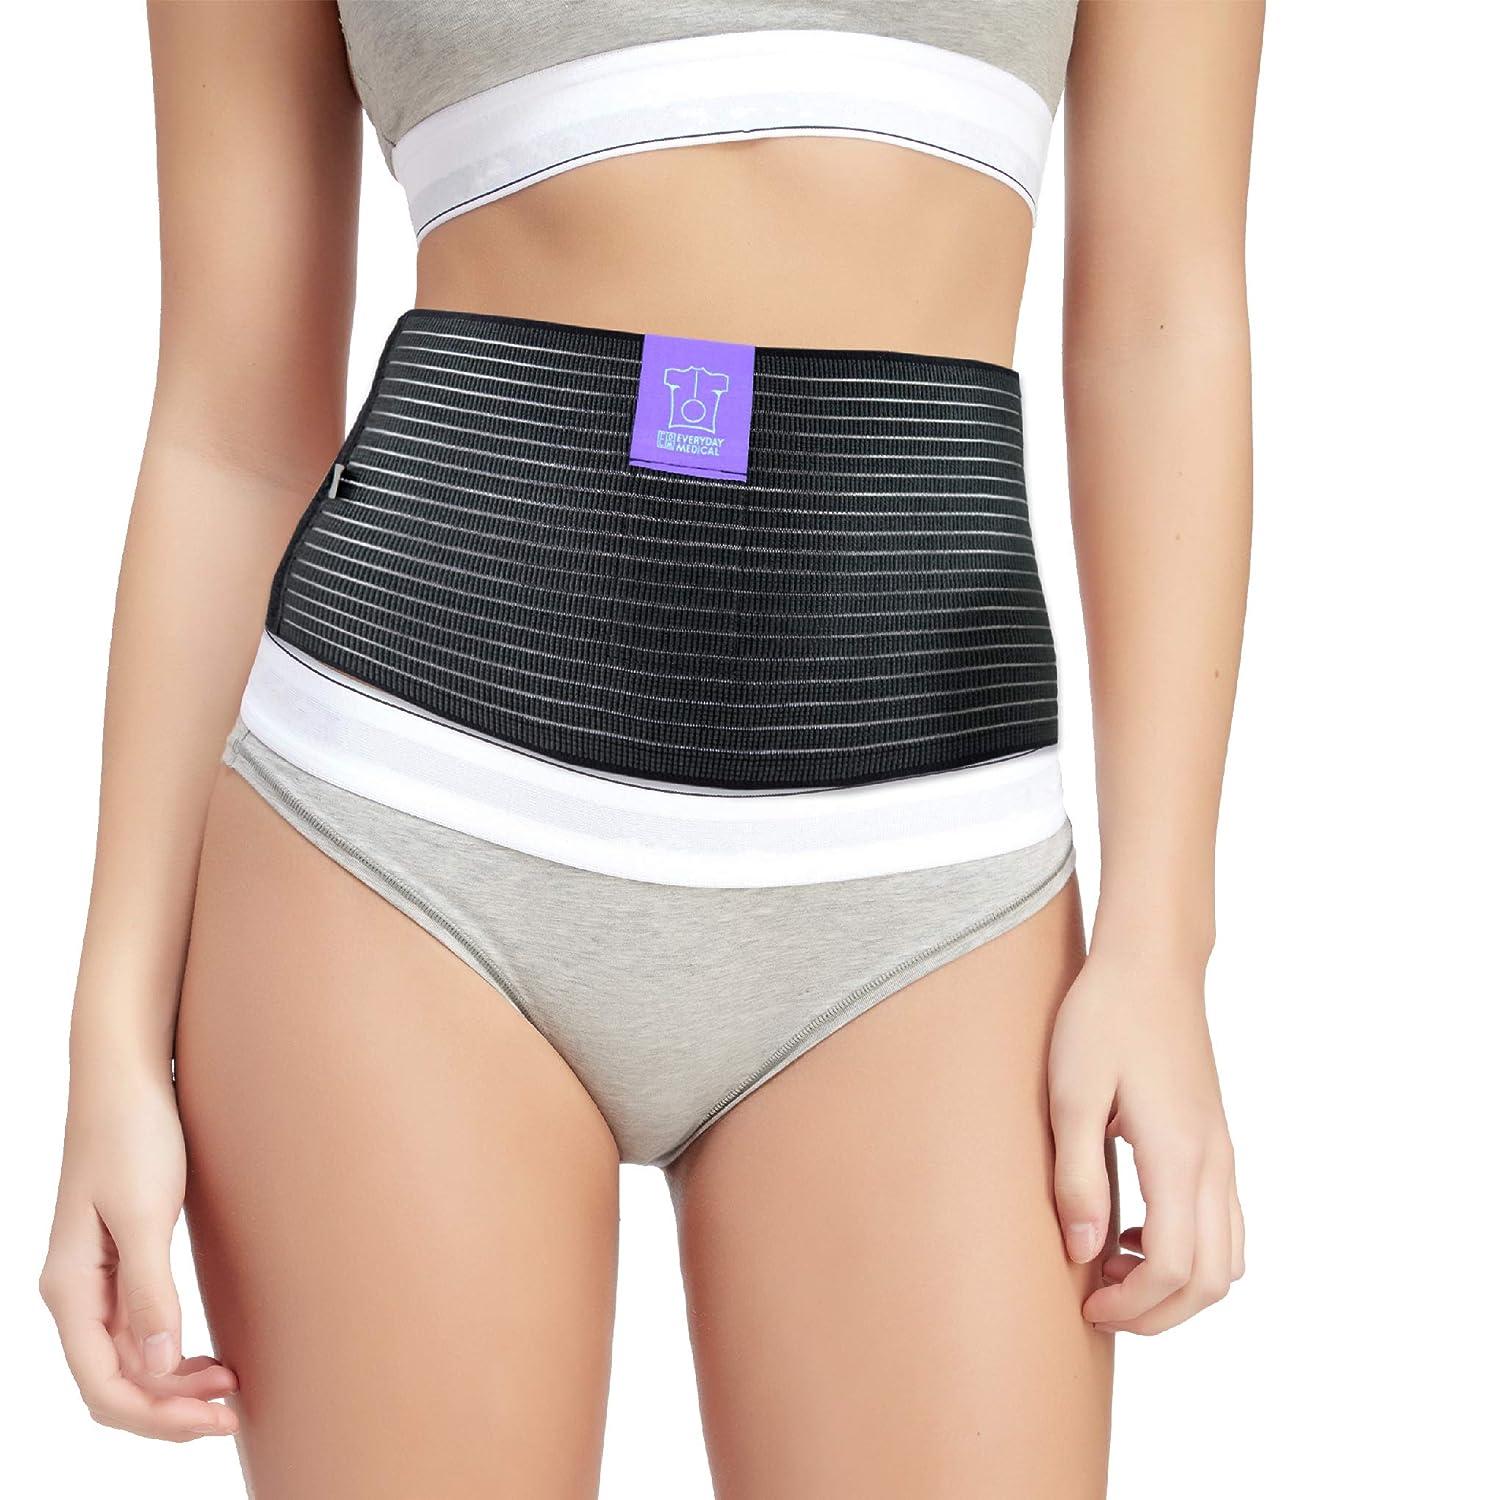 Umbilical Hernia Belt by Everyday Medical - Breathable Fabric